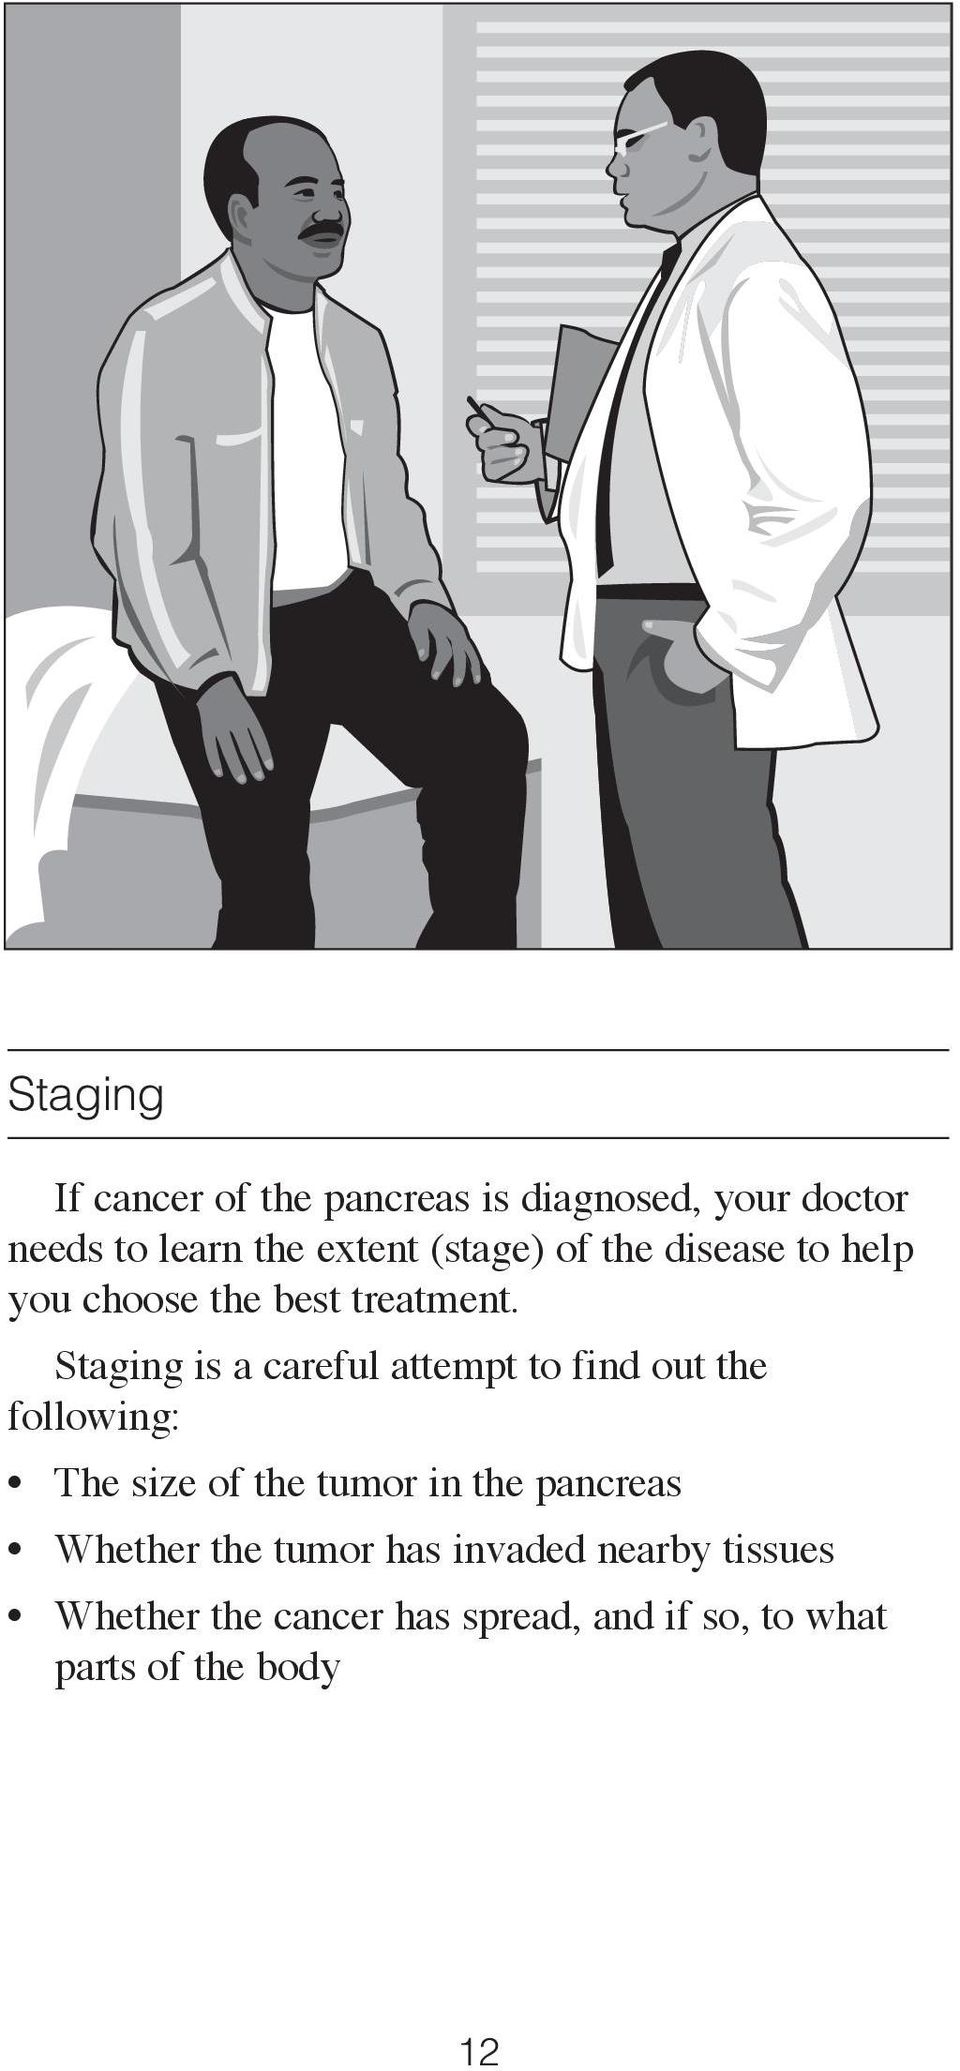 Staging is a careful attempt to find out the following: The size of the tumor in the